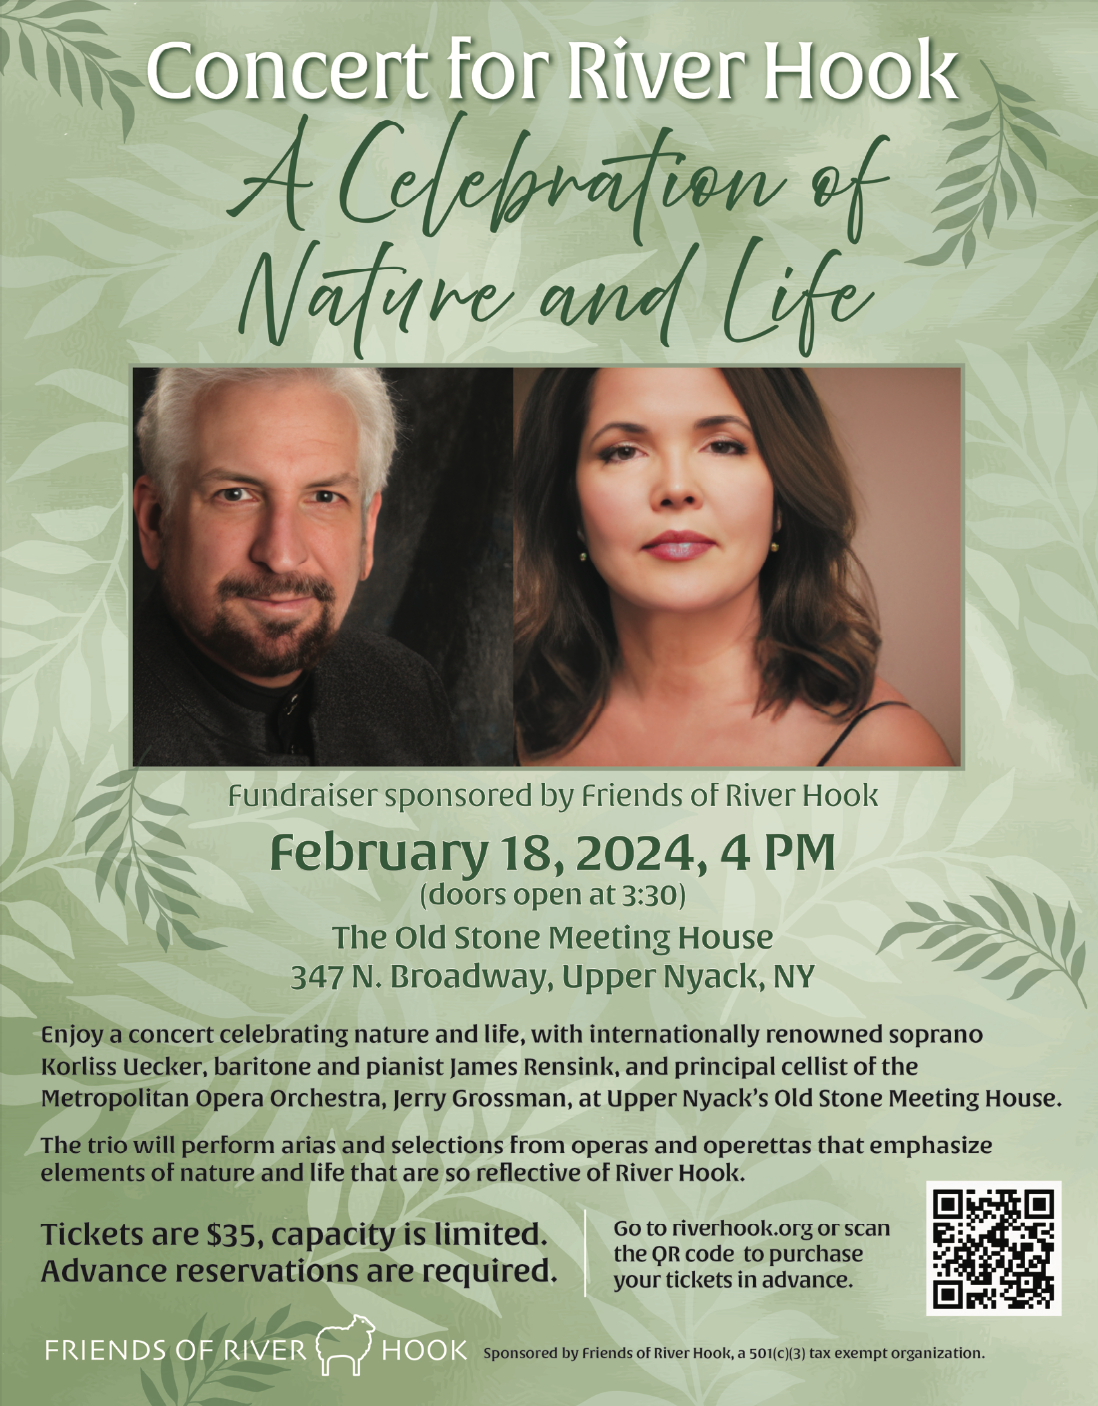 SOLD OUT!!! Concert for River Hook: A Celebration of Nature and Life